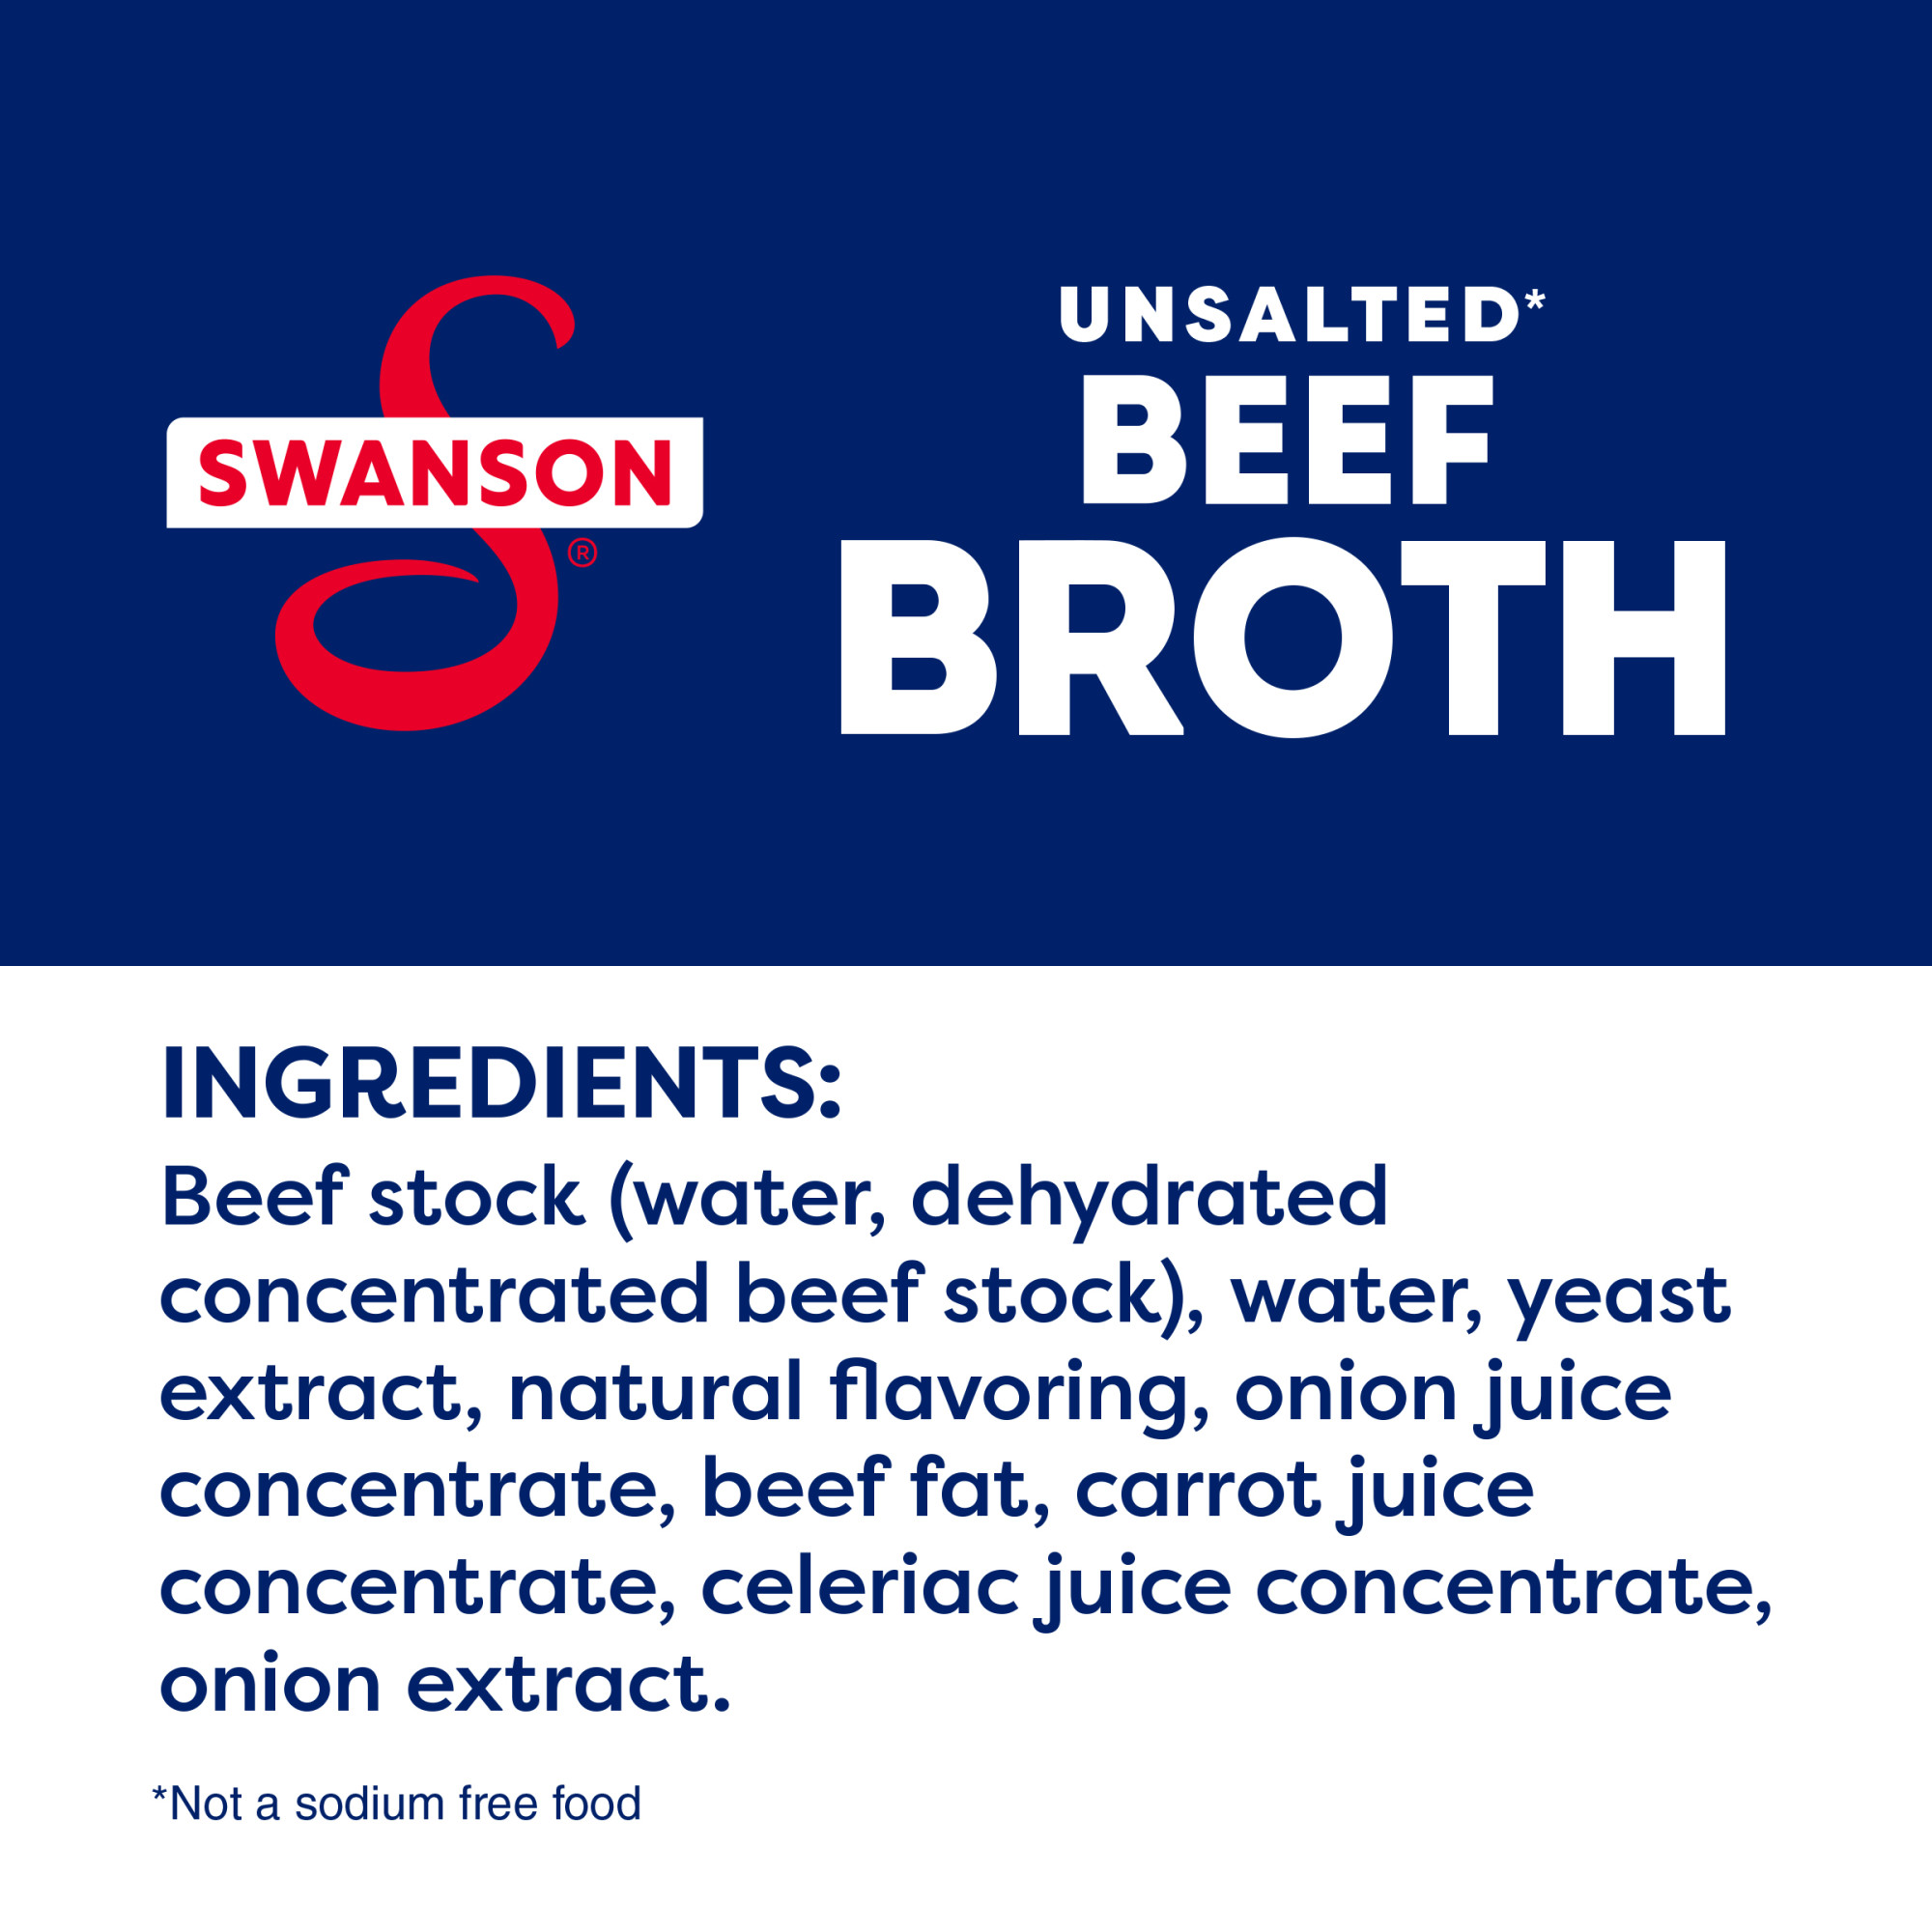 Swanson 100% Natural, Gluten-Free Unsalted Beef Broth, 32 oz Carton - image 3 of 15